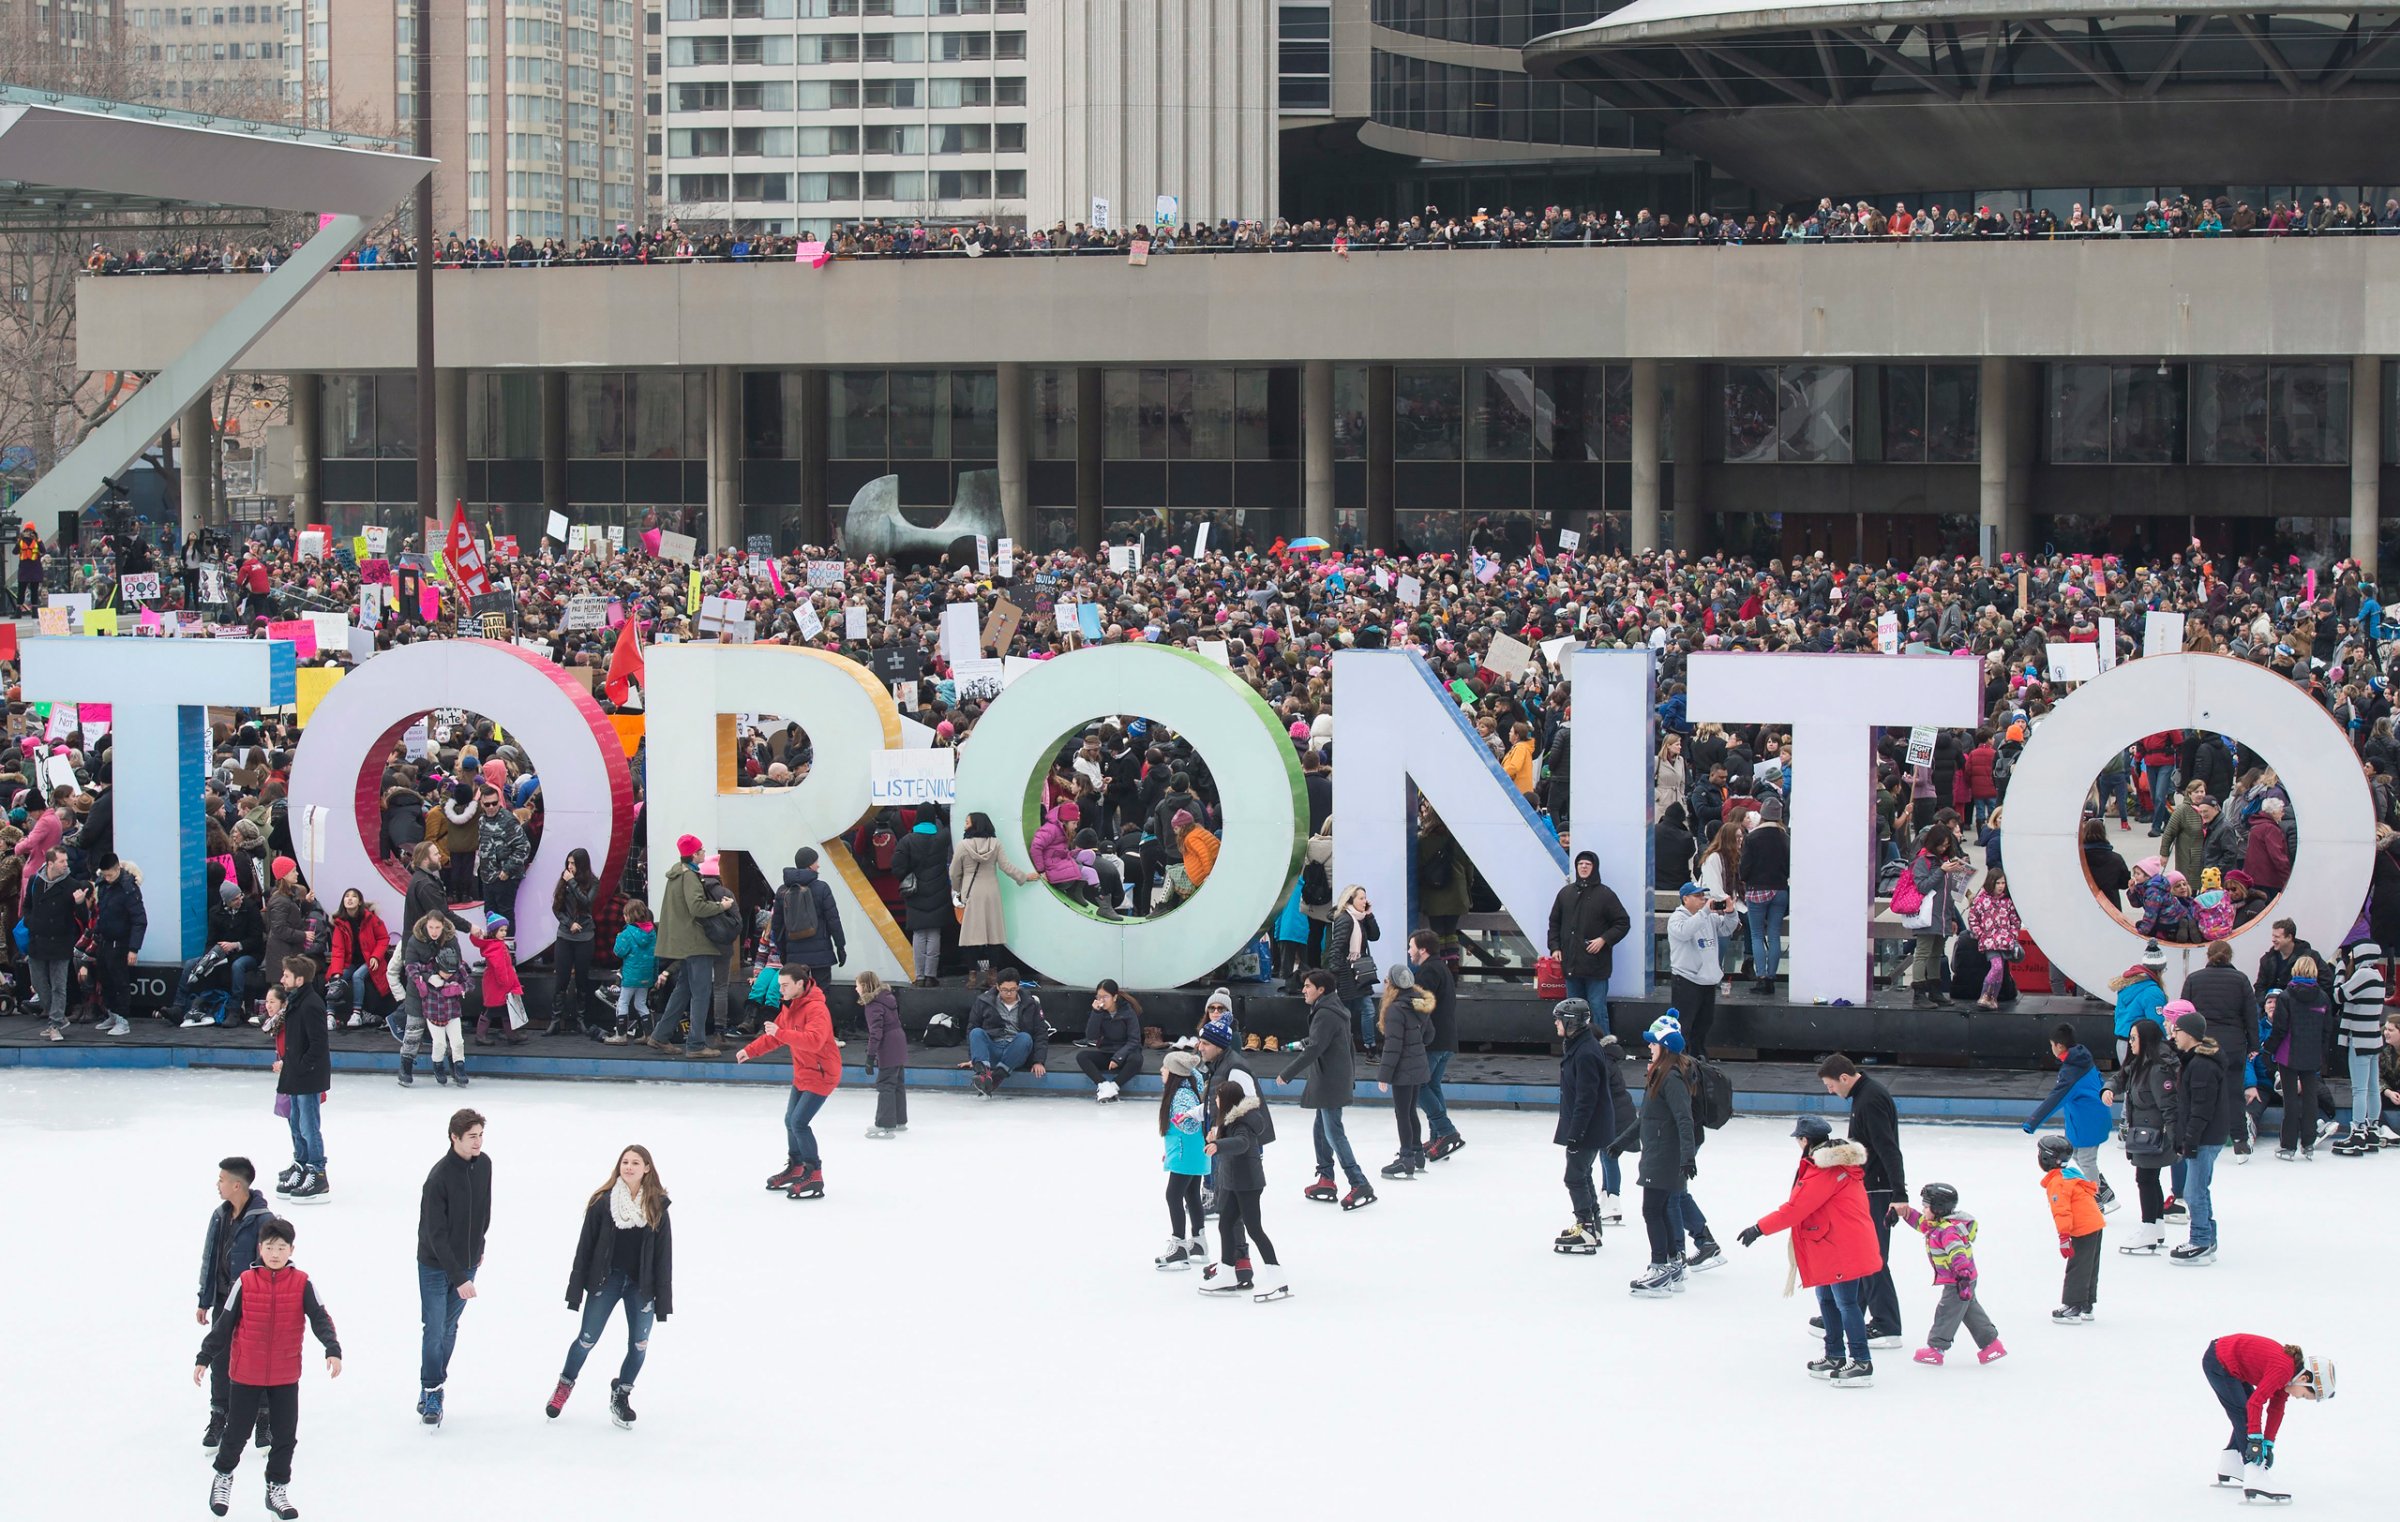 Protesters march gather in Nathan Phillips Square, in support of the Women's March on Washington, in Toronto on Saturday, January 21, 2017. Protests are being held across Canada today in support of the Women's March on Washington. Organizers say 30 events in all have been organized across Canada, including Ottawa, Toronto, Montreal and Vancouver. (Frank Gunn/The Canadian Press via AP)